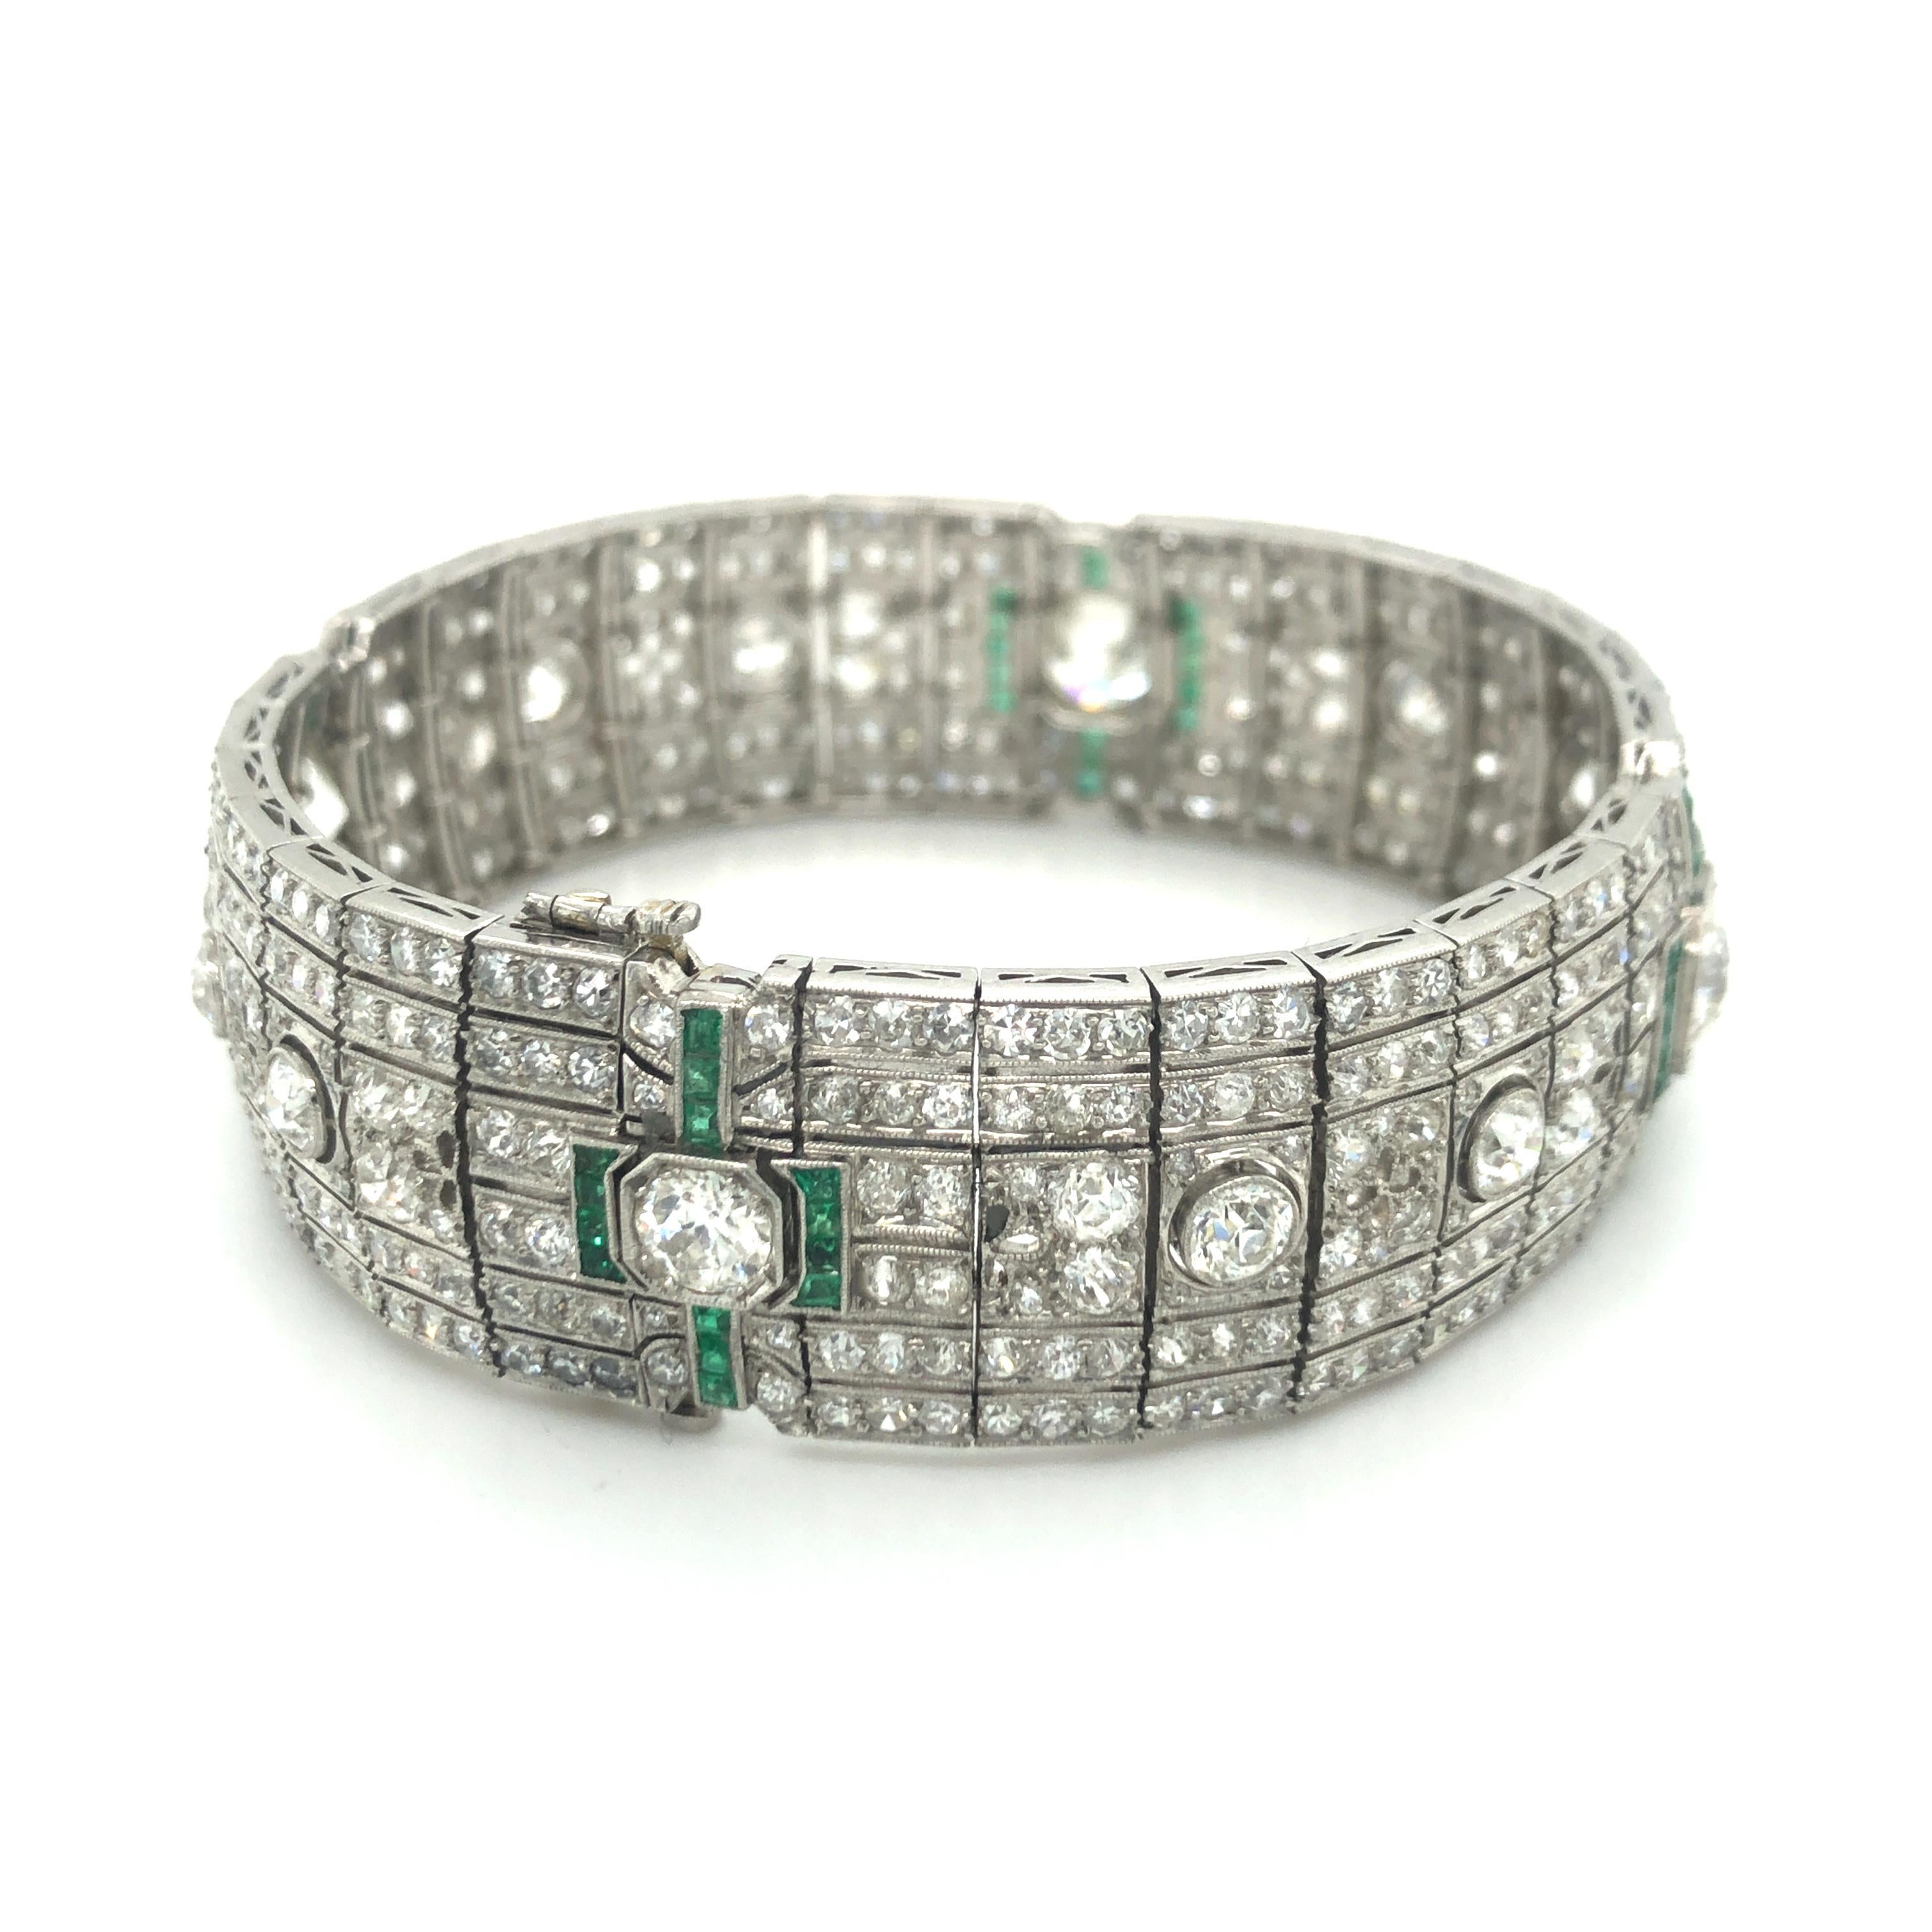 This magnificent bracelet is an exceptionally fine example of its era. Handcrafted in platinum and artfully à-jour-set with 492 old-cut diamonds and 62 square-cut emeralds, this bracelet is a true work of art. 

This bracelet nestles gently around